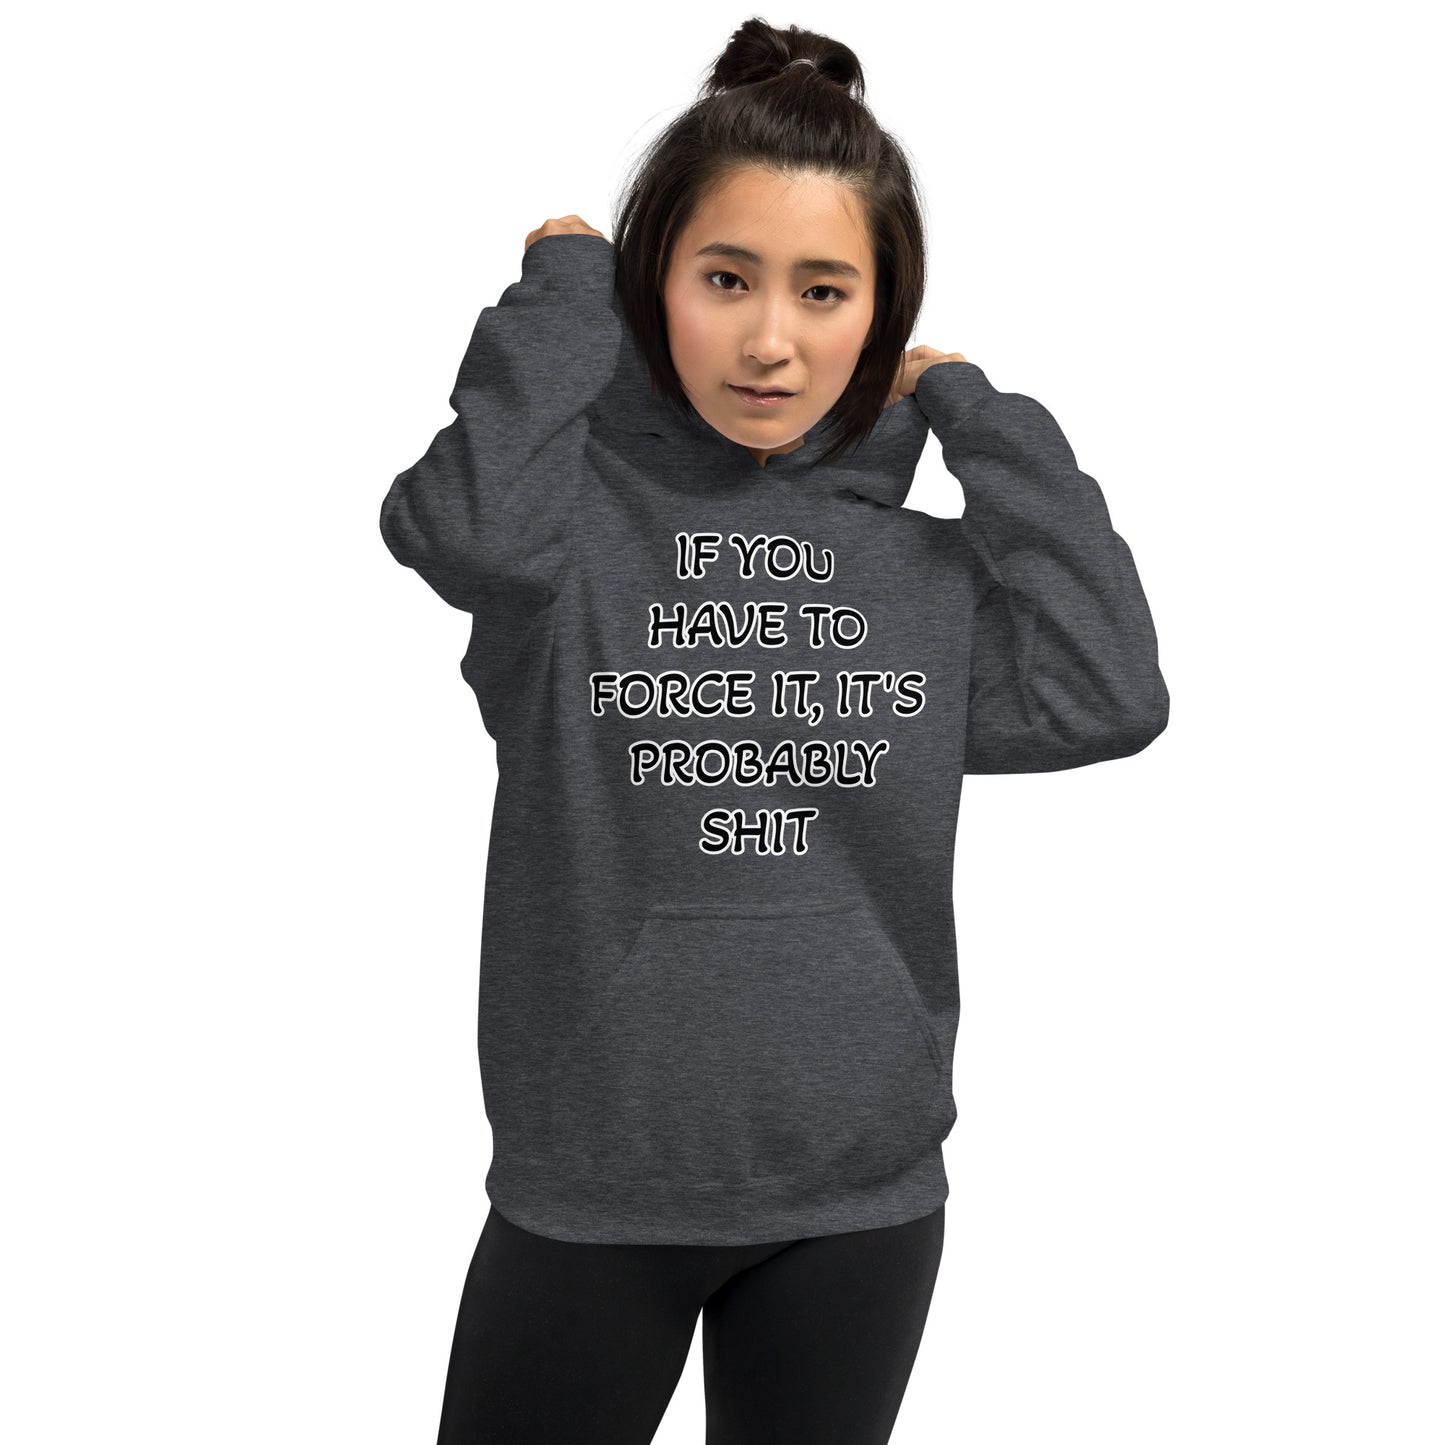 IF YOU HAVE TO FORCE IT, IT'S PROBABLY SHIT- Unisex Hoodie